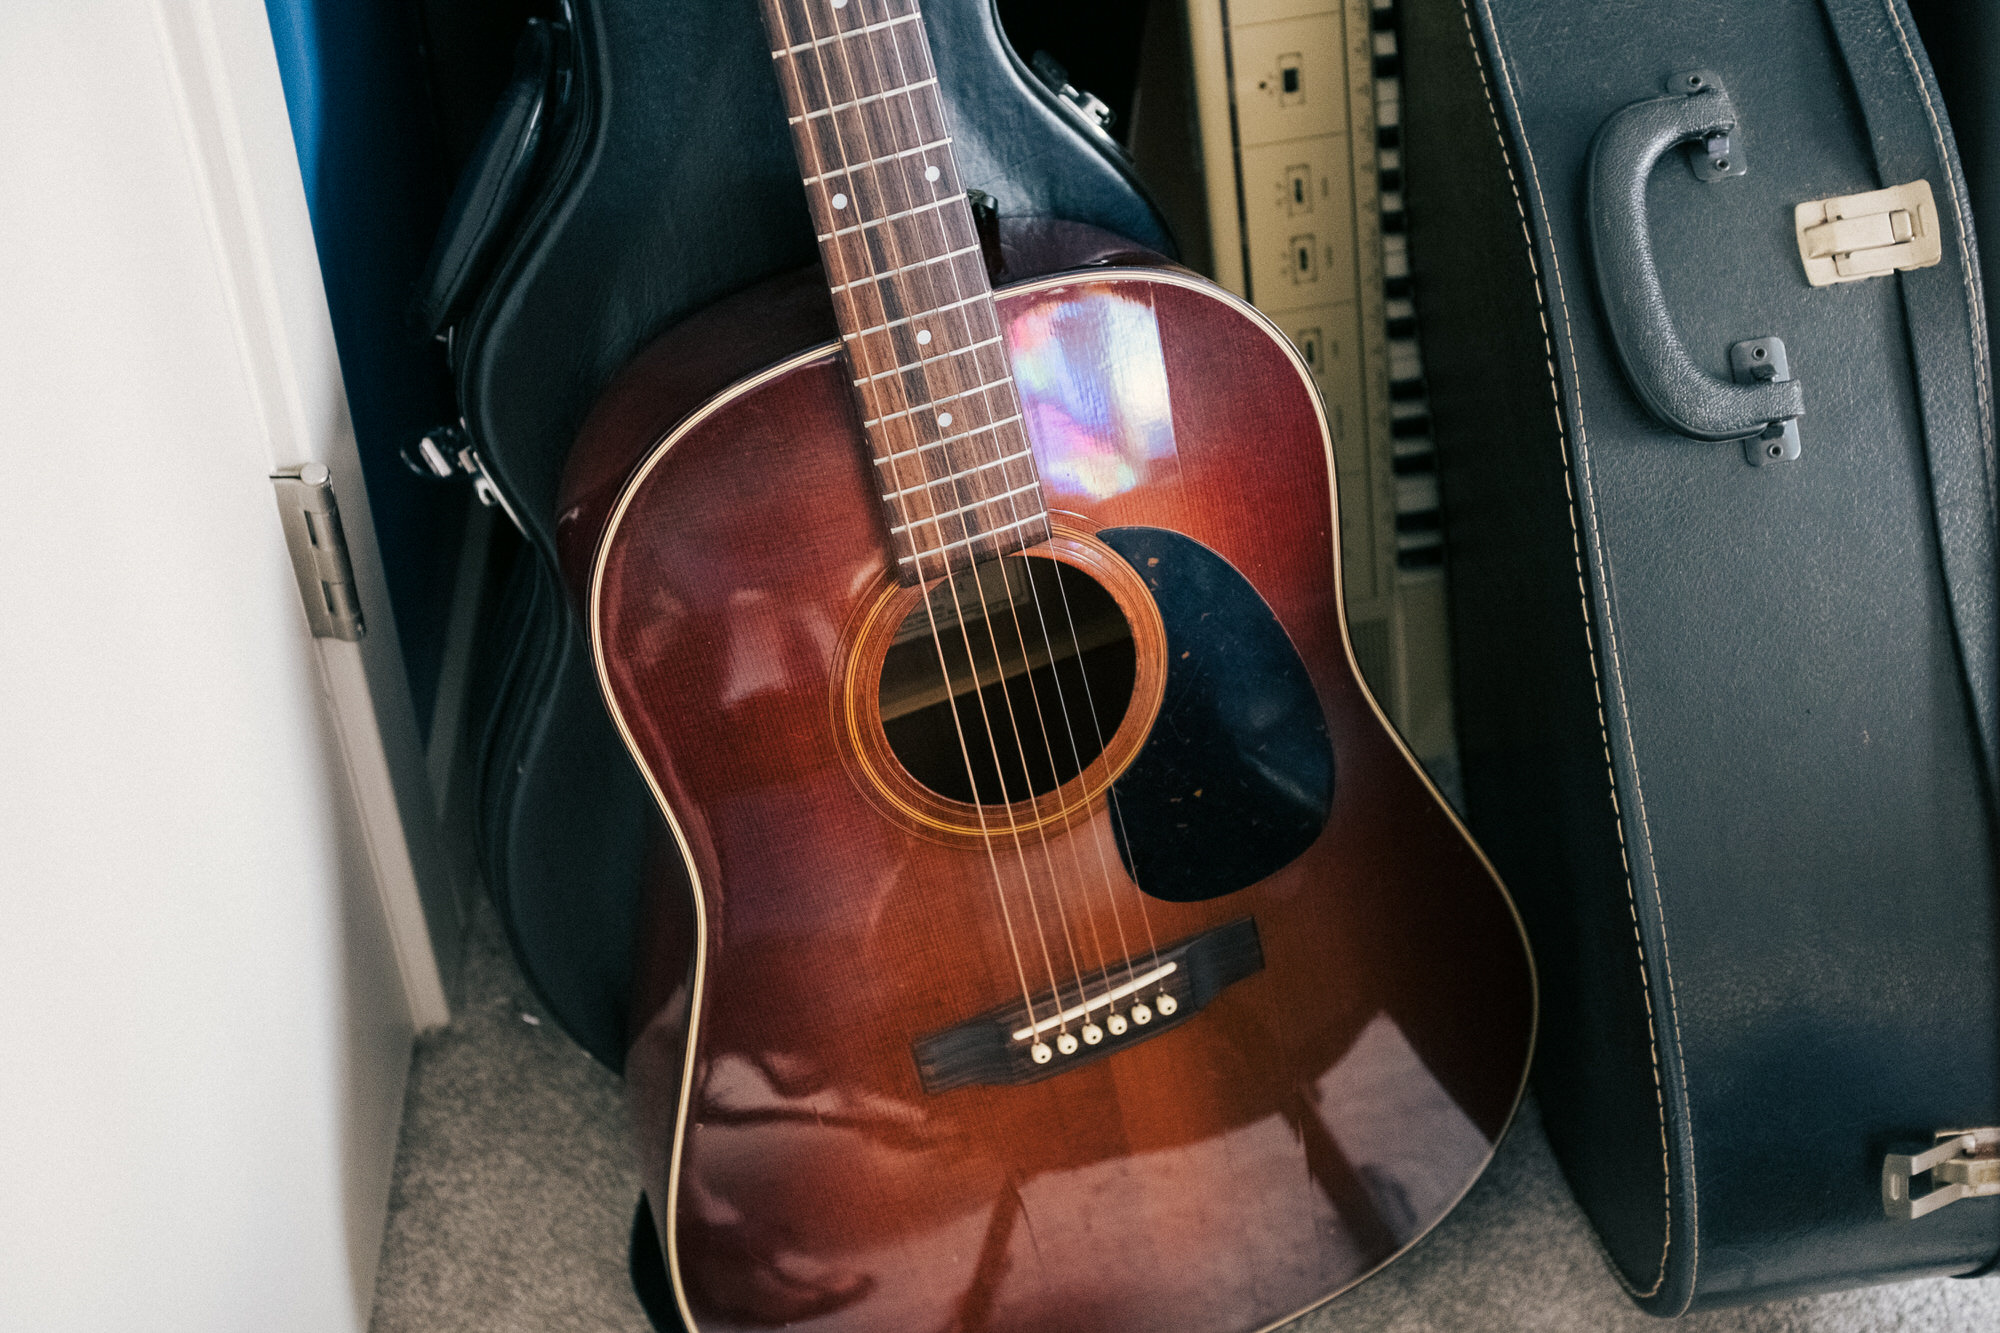 An image of the Vintage Epiphone Acoustic.